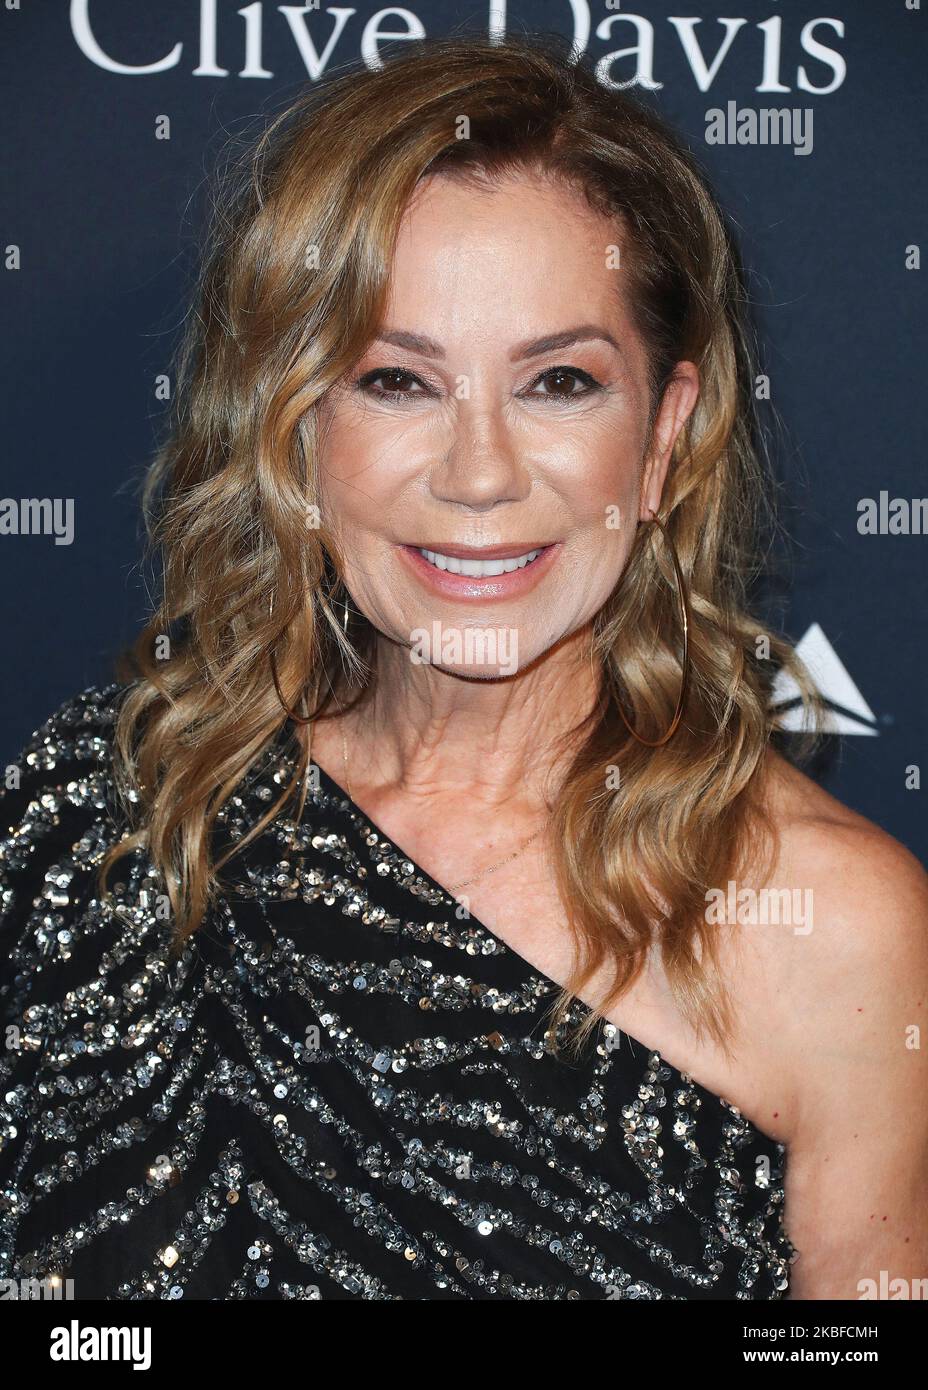 BEVERLY HILLS, LOS ANGELES, CALIFORNIA, USA - JANUARY 25: Kathie Lee  Gifford arrives at The Recording Academy And Clive Davis' 2020 Pre-GRAMMY  Gala held at The Beverly Hilton Hotel on January 25,